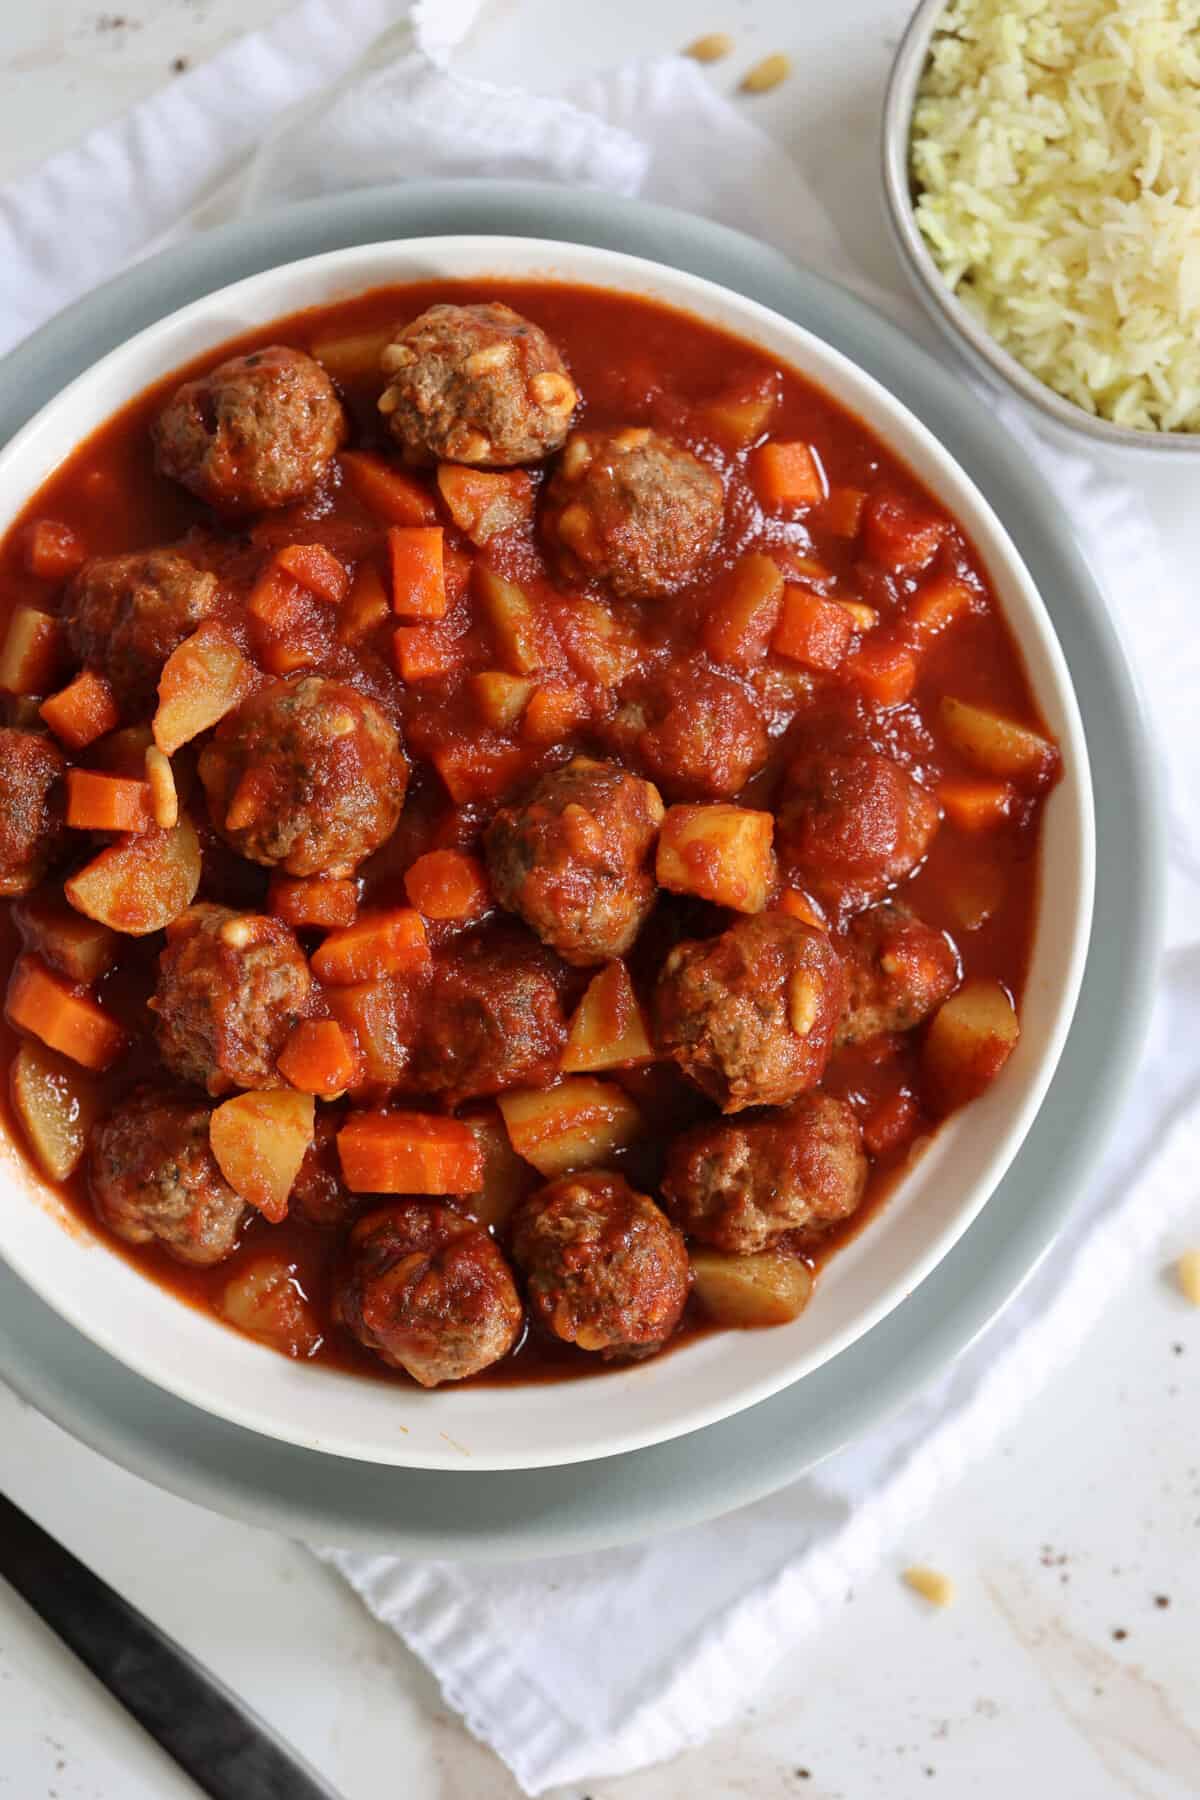 slow cooker lamb meatballs, potatoes and carrots in a white bowl